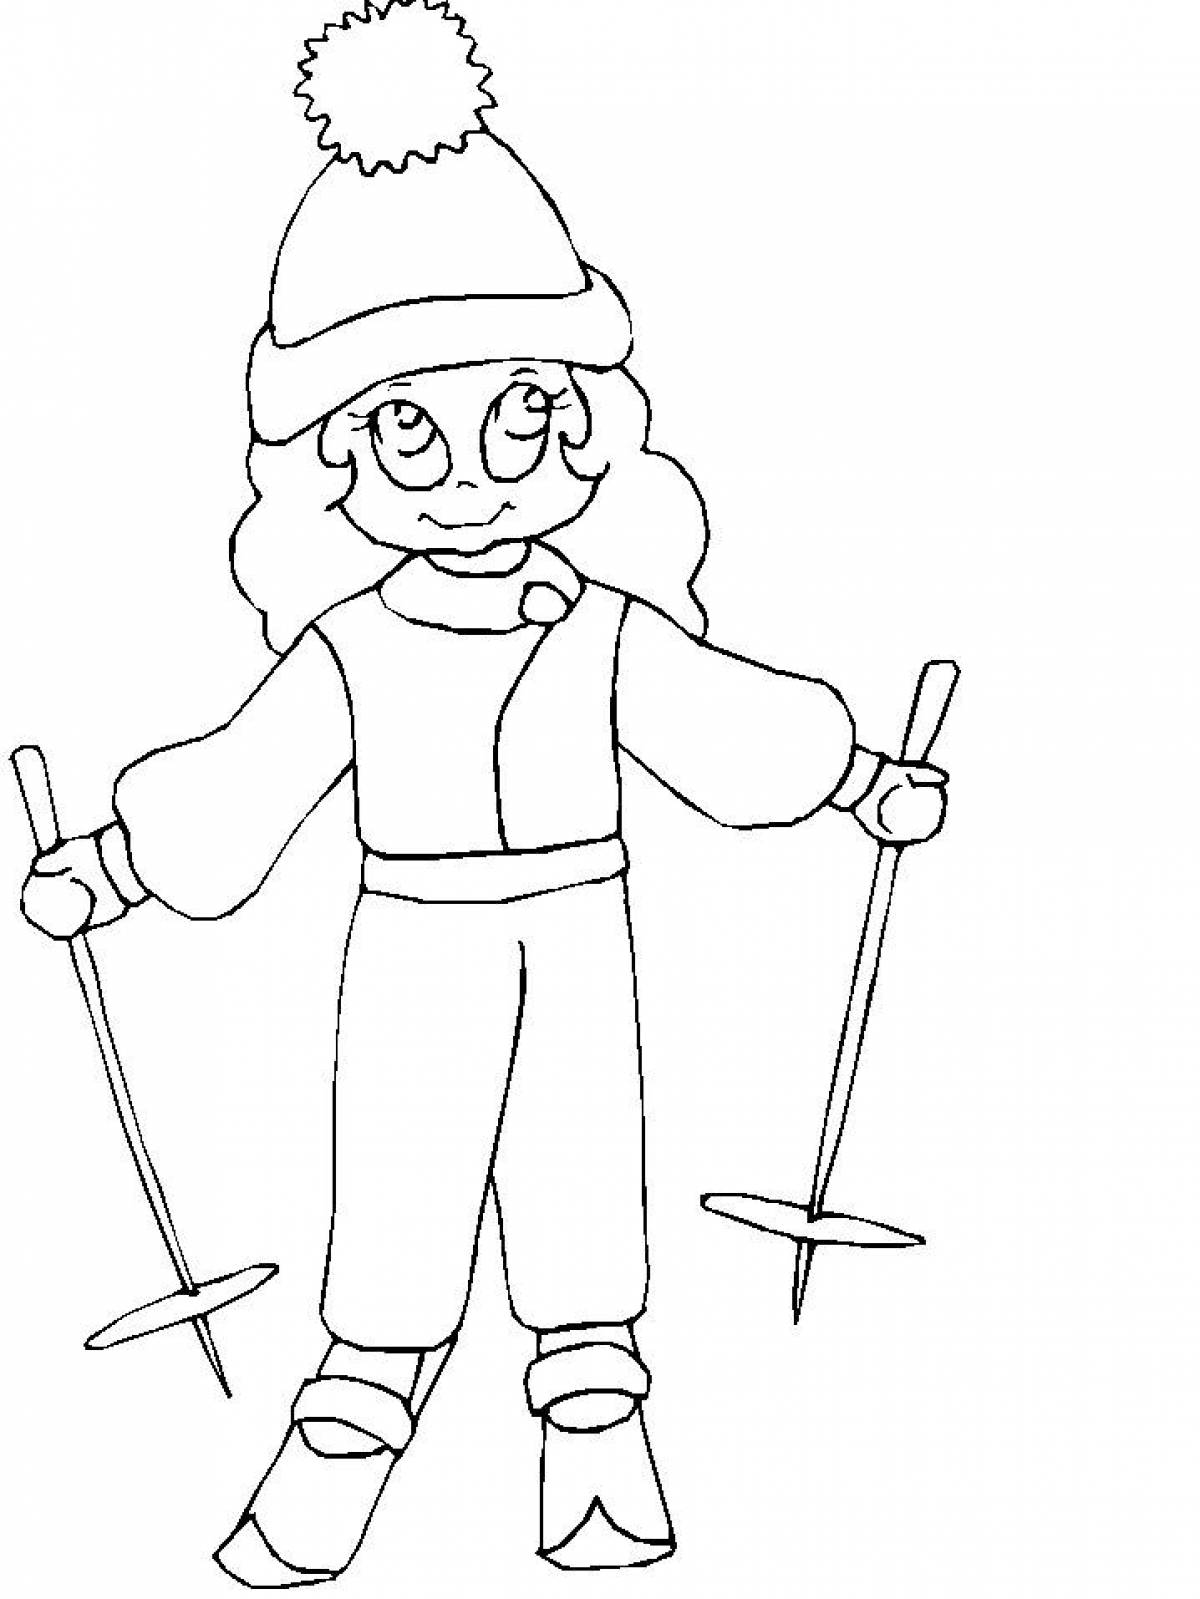 Coloring page cheerful skier